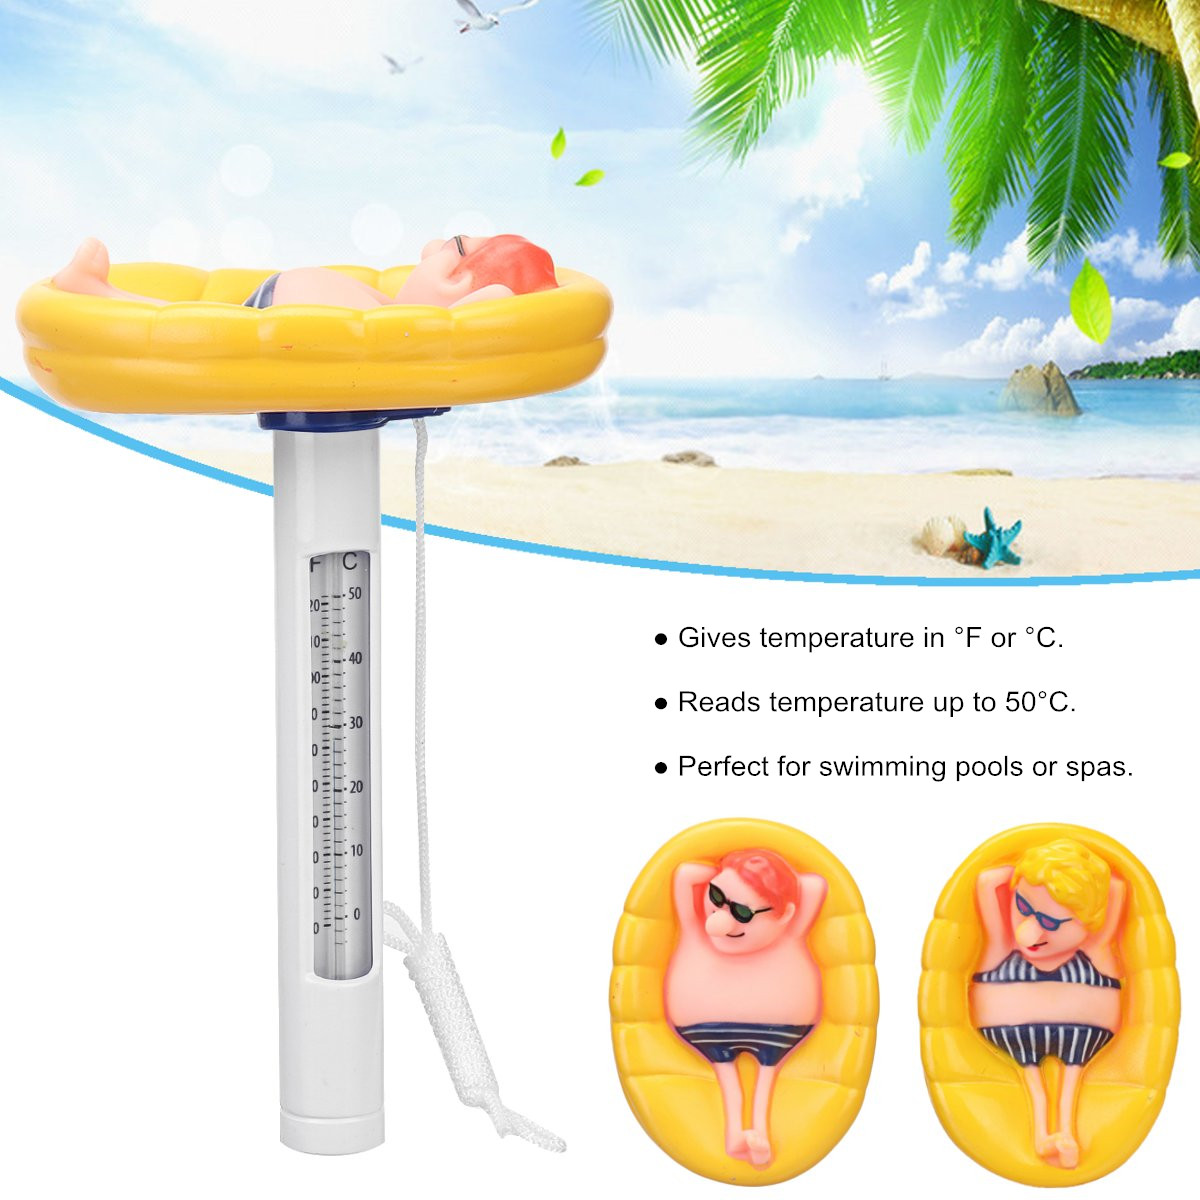 Cartoon-Shatter-Resistant-Floating-Pool-Thermometer-With-String-For-Swimming-Pools-Spas-Hot-Tubs-Wat-1934965-4